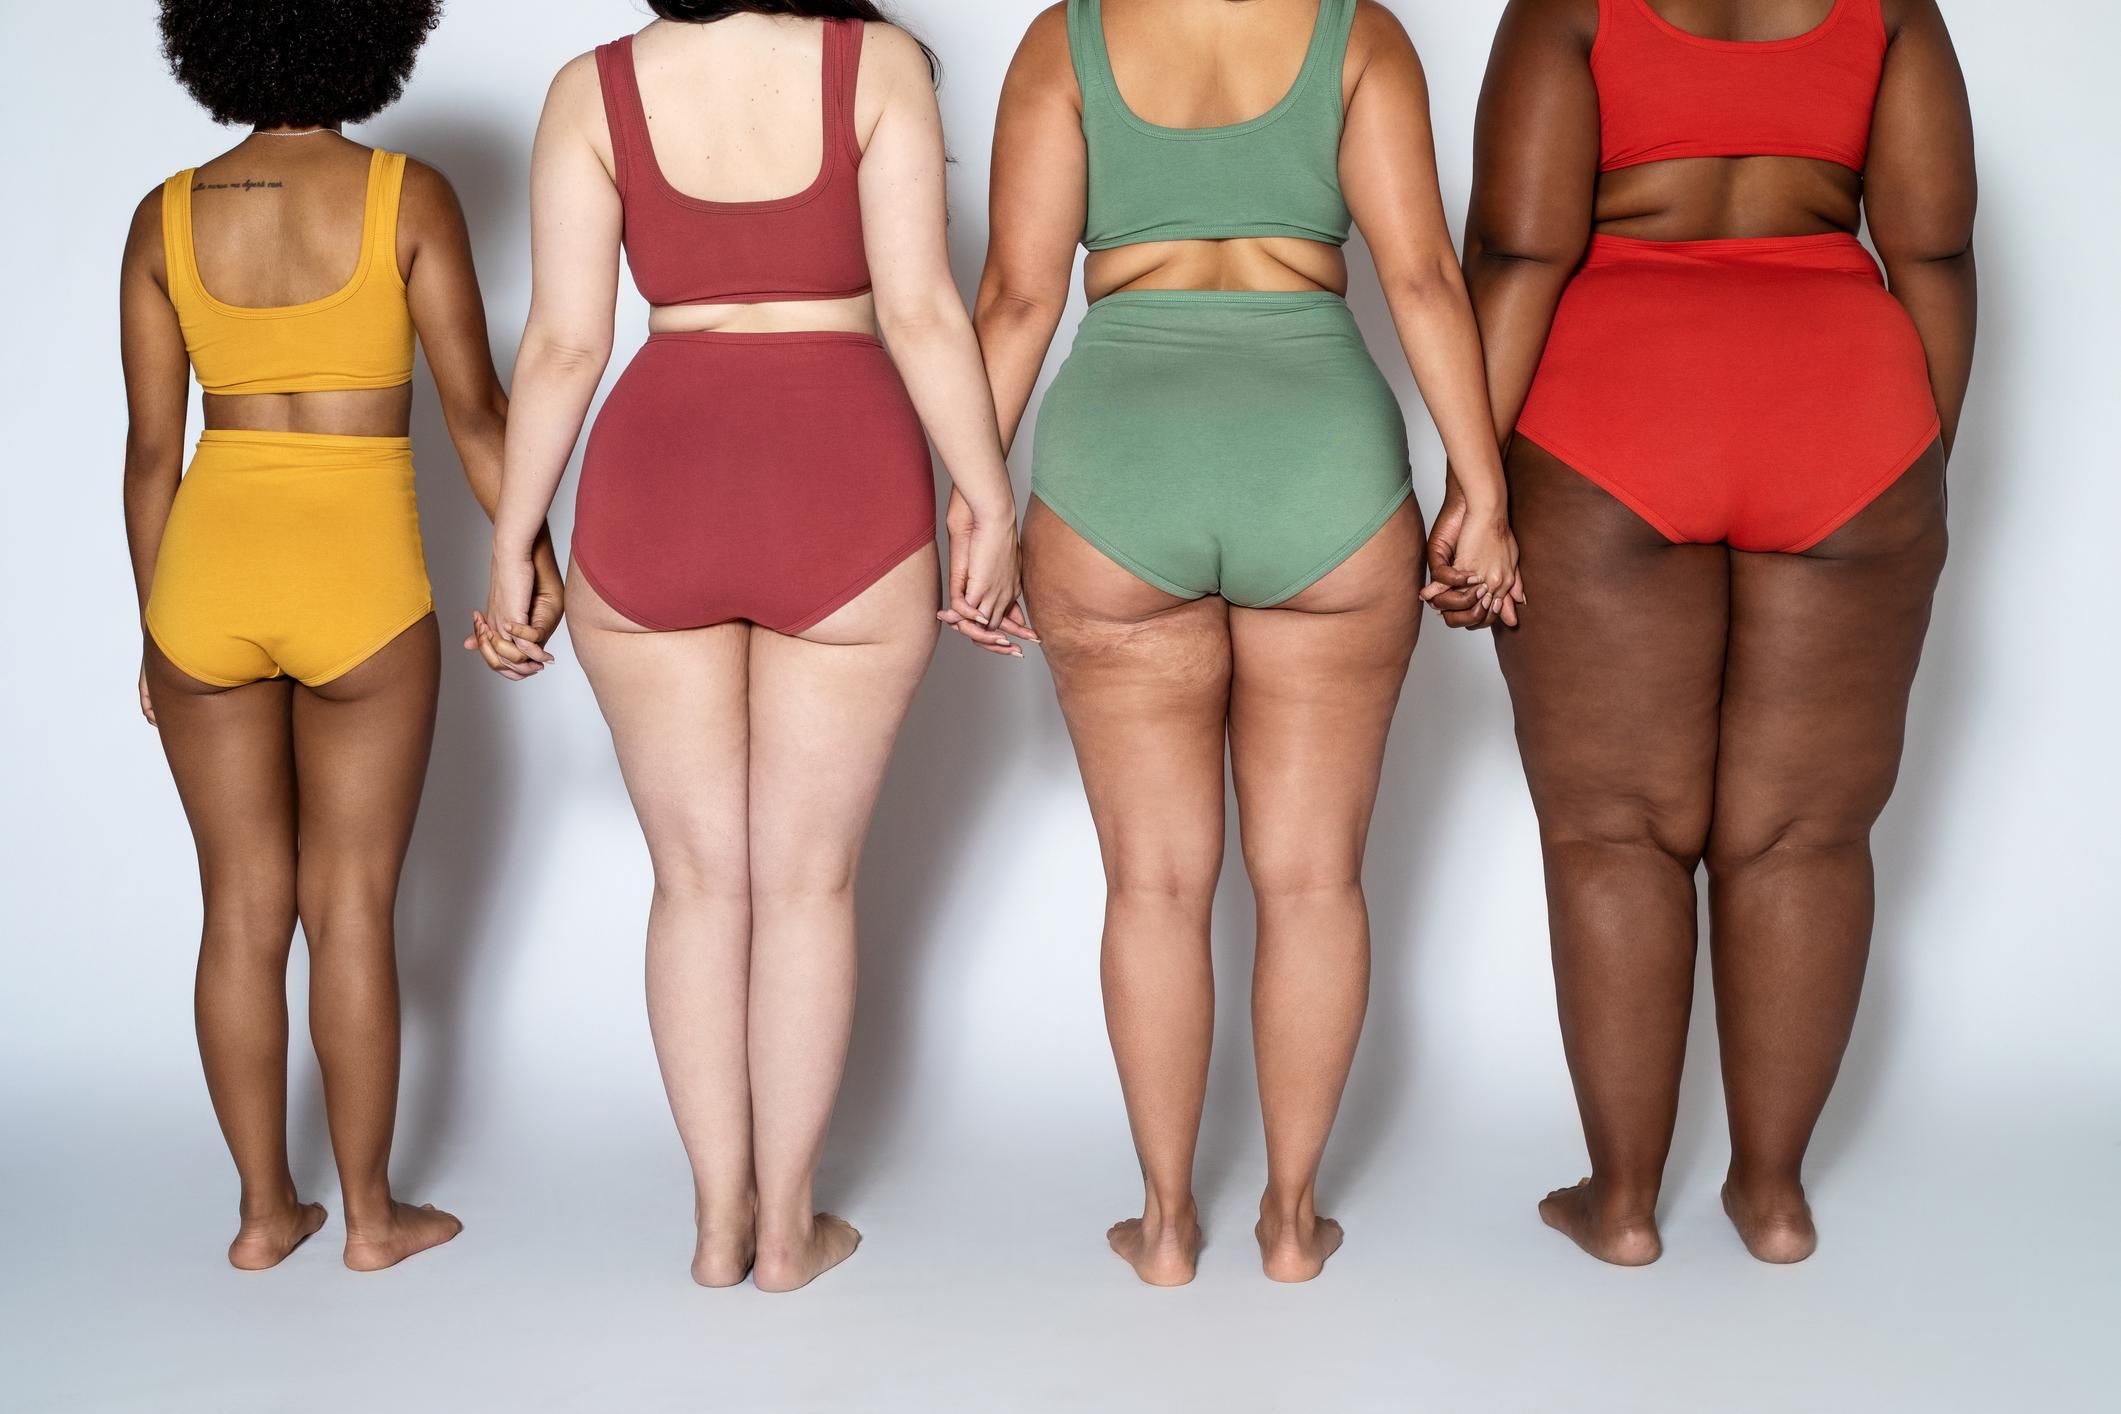 12 Bathing Suits Every Woman Can Feel Confident In